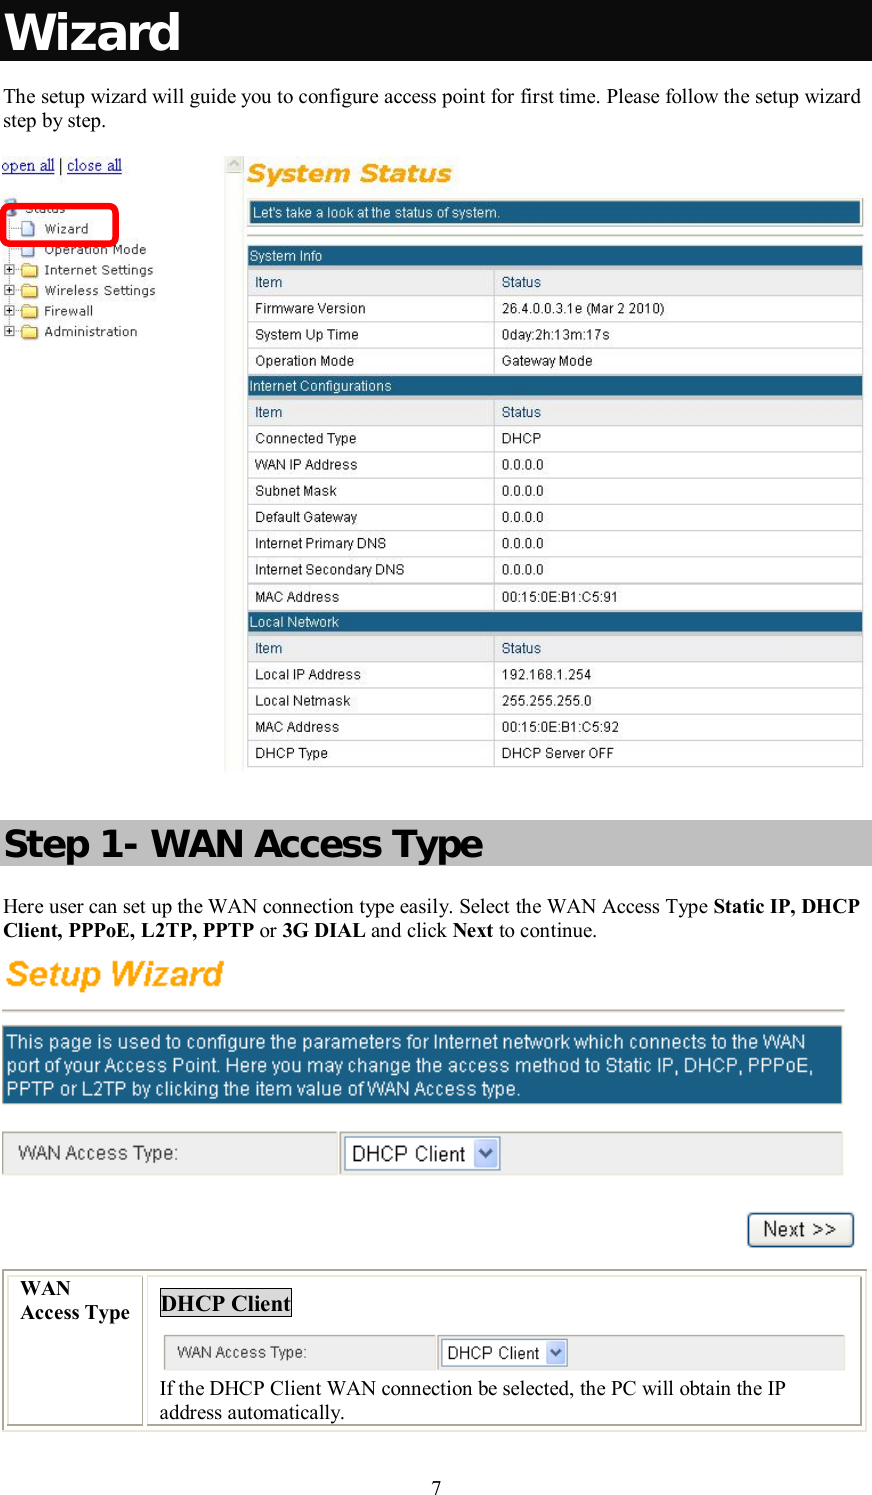    7 Wizard  The setup wizard will guide you to configure access point for first time. Please follow the setup wizard step by step.     Step 1- WAN Access Type Here user can set up the WAN connection type easily. Select the WAN Access Type Static IP, DHCP Client, PPPoE, L2TP, PPTP or 3G DIAL and click Next to continue.  WAN Access Type DHCP Client  If the DHCP Client WAN connection be selected, the PC will obtain the IP address automatically. 